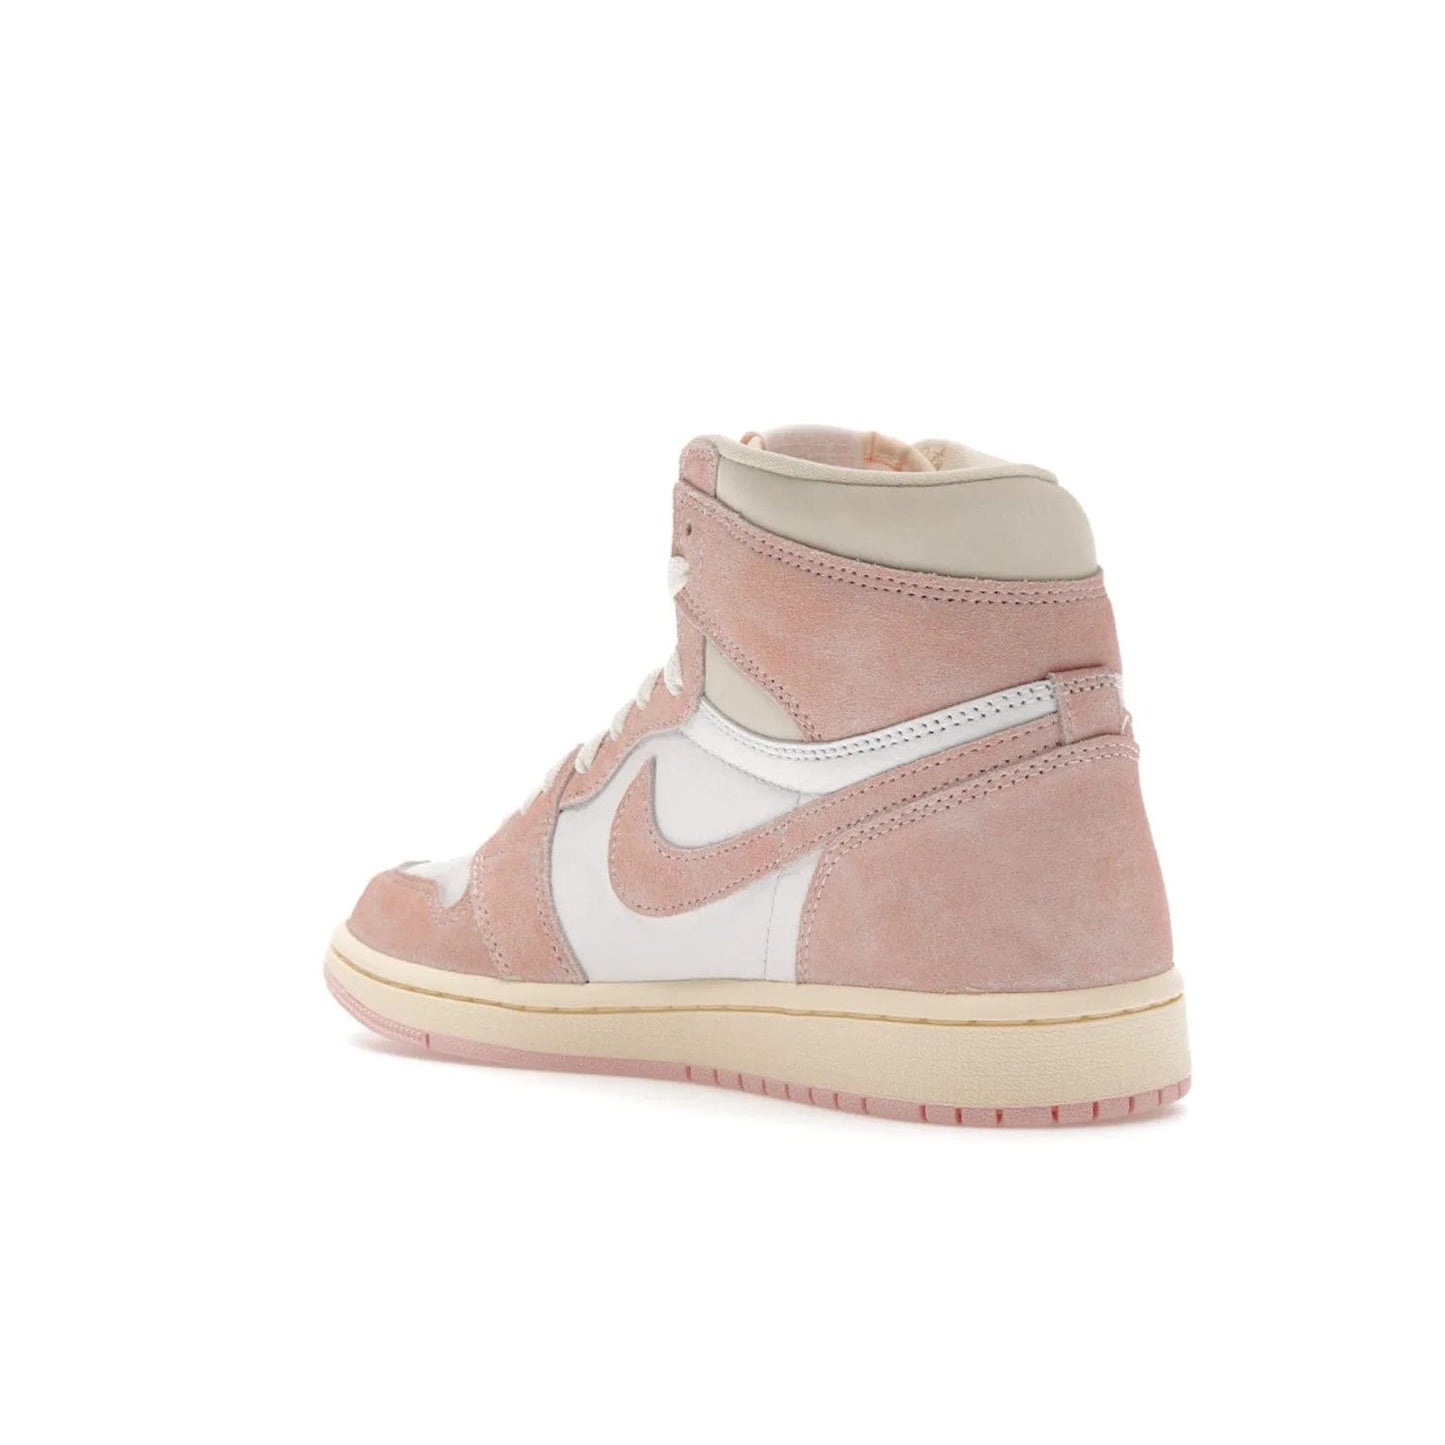 Jordan 1 Retro High OG Washed Pink (Women's) - Image 24 - Only at www.BallersClubKickz.com - Iconic Air Jordan 1 Retro High OG for women with unique pink suede and white leather uppers. Get the timeless look on April 22, 2023.